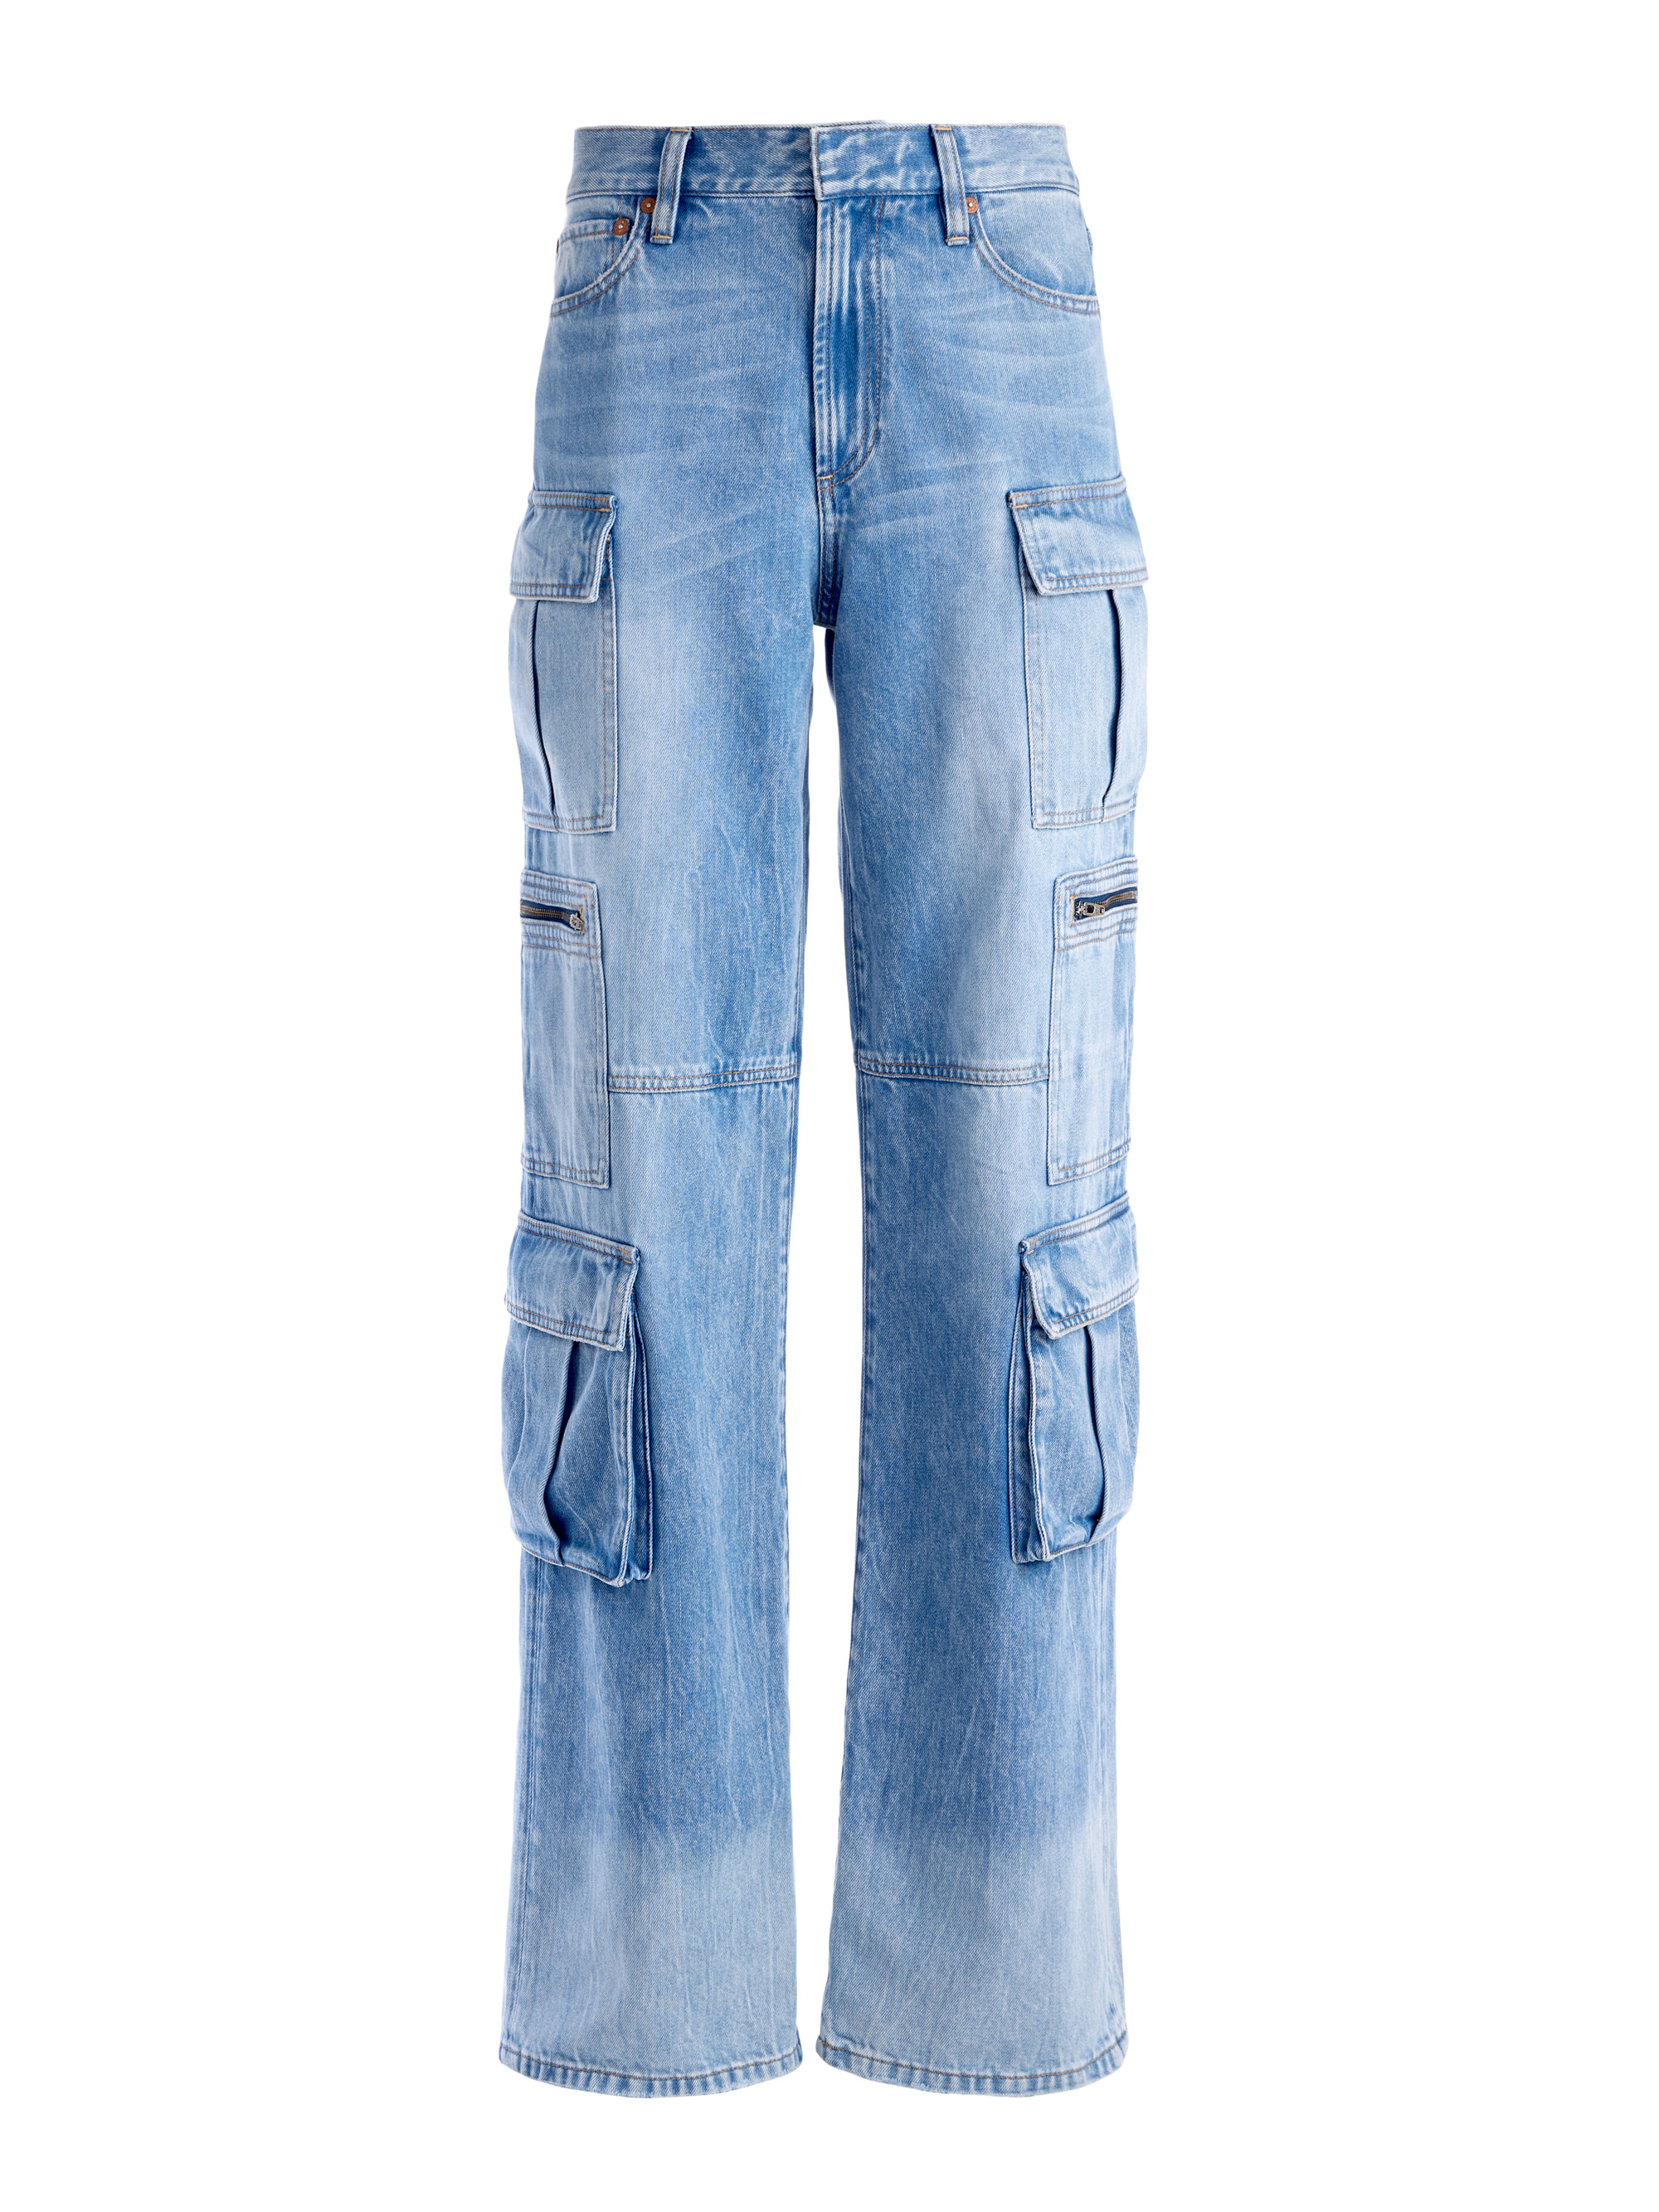 CAY BAGGY CARGO JEANS - BREA BLUE - Alice And Olivia